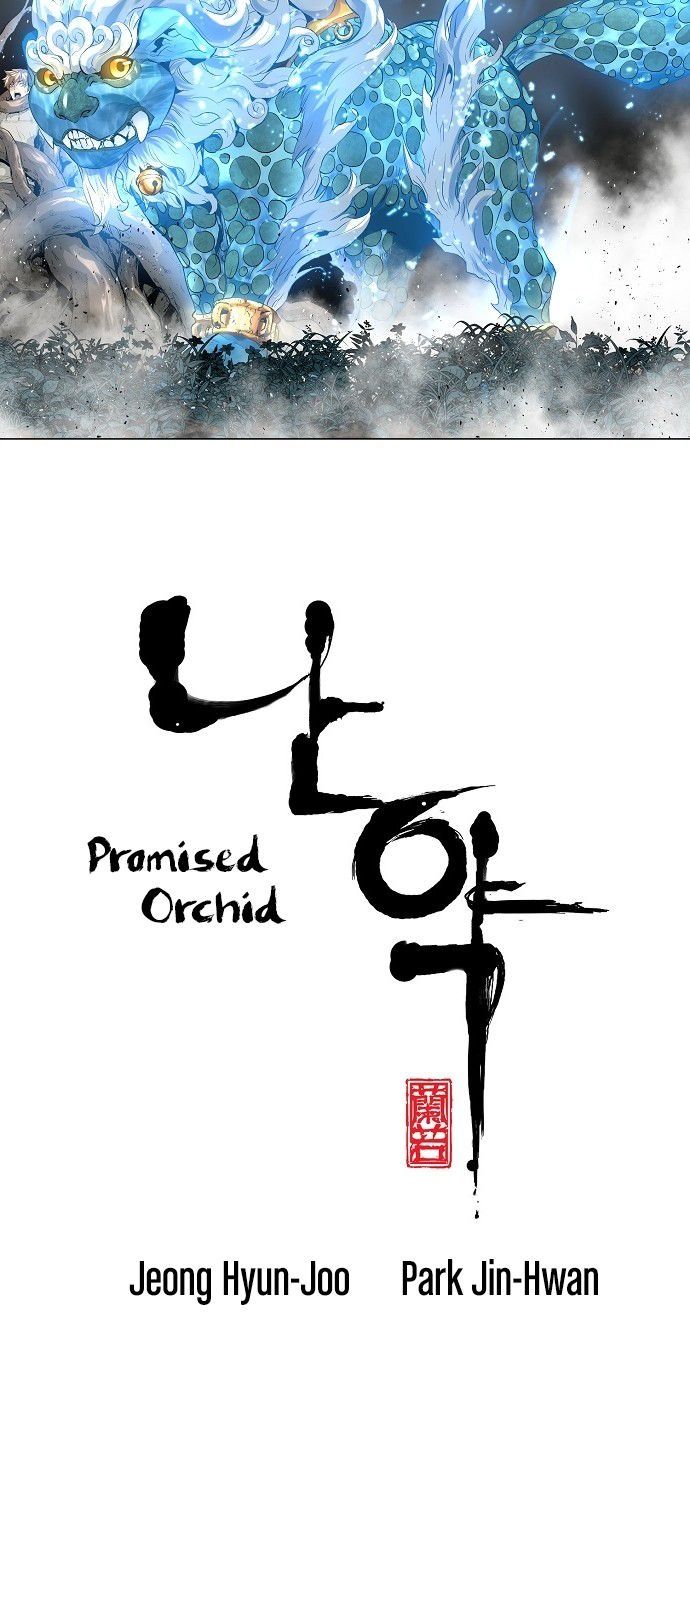 Promised Orchid 9 2